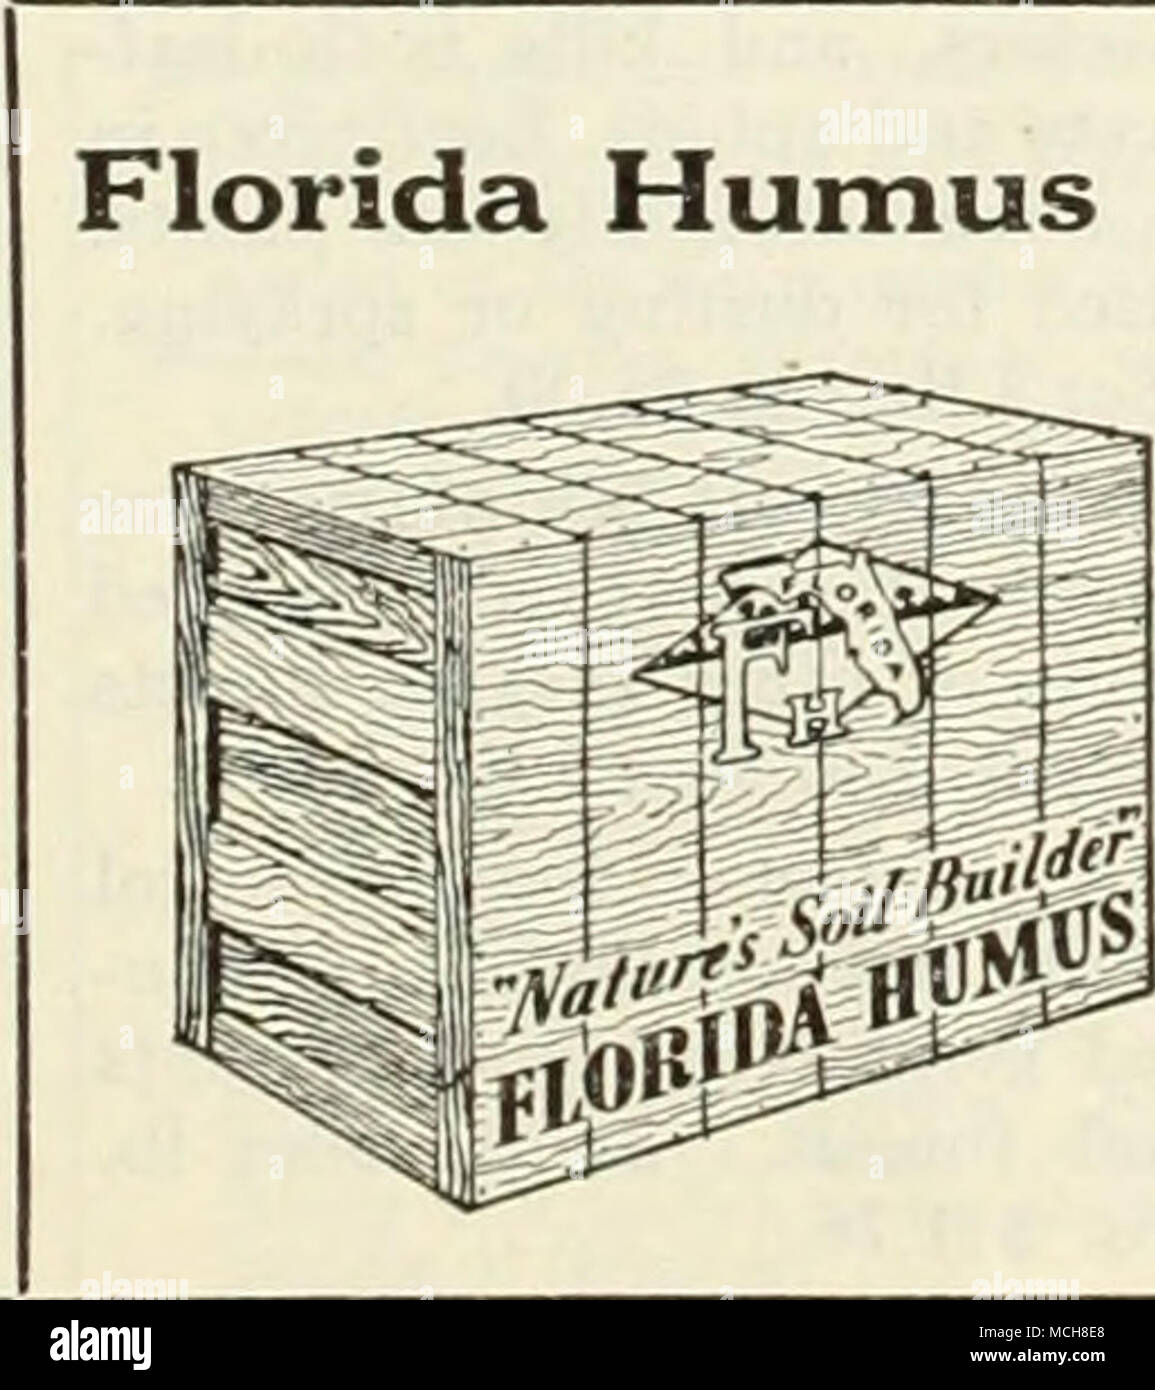 . For Lawns, Flower Beds, Window Boxes, Seed Beds, Shrubs, Potted Plants, Vegetables Florida Humus is a light, fluffy, clean, and odorless soil builder which holds moisture and dissolved plant food which otherwise would be lost. It favors the growth of beneficial soil bacteria and provides an ideal medium for the development of fine feeding roots. It is valuable organic matter in its purest and richest form, besides being a plant food containing more than 3% valuable nitrogen. Use Florida Humus freely mixed with soil. Wire-bound leak-proof containers: 100 lbs. $2.50; 200 lbs. $4.50. Henry A. D Stock Photo